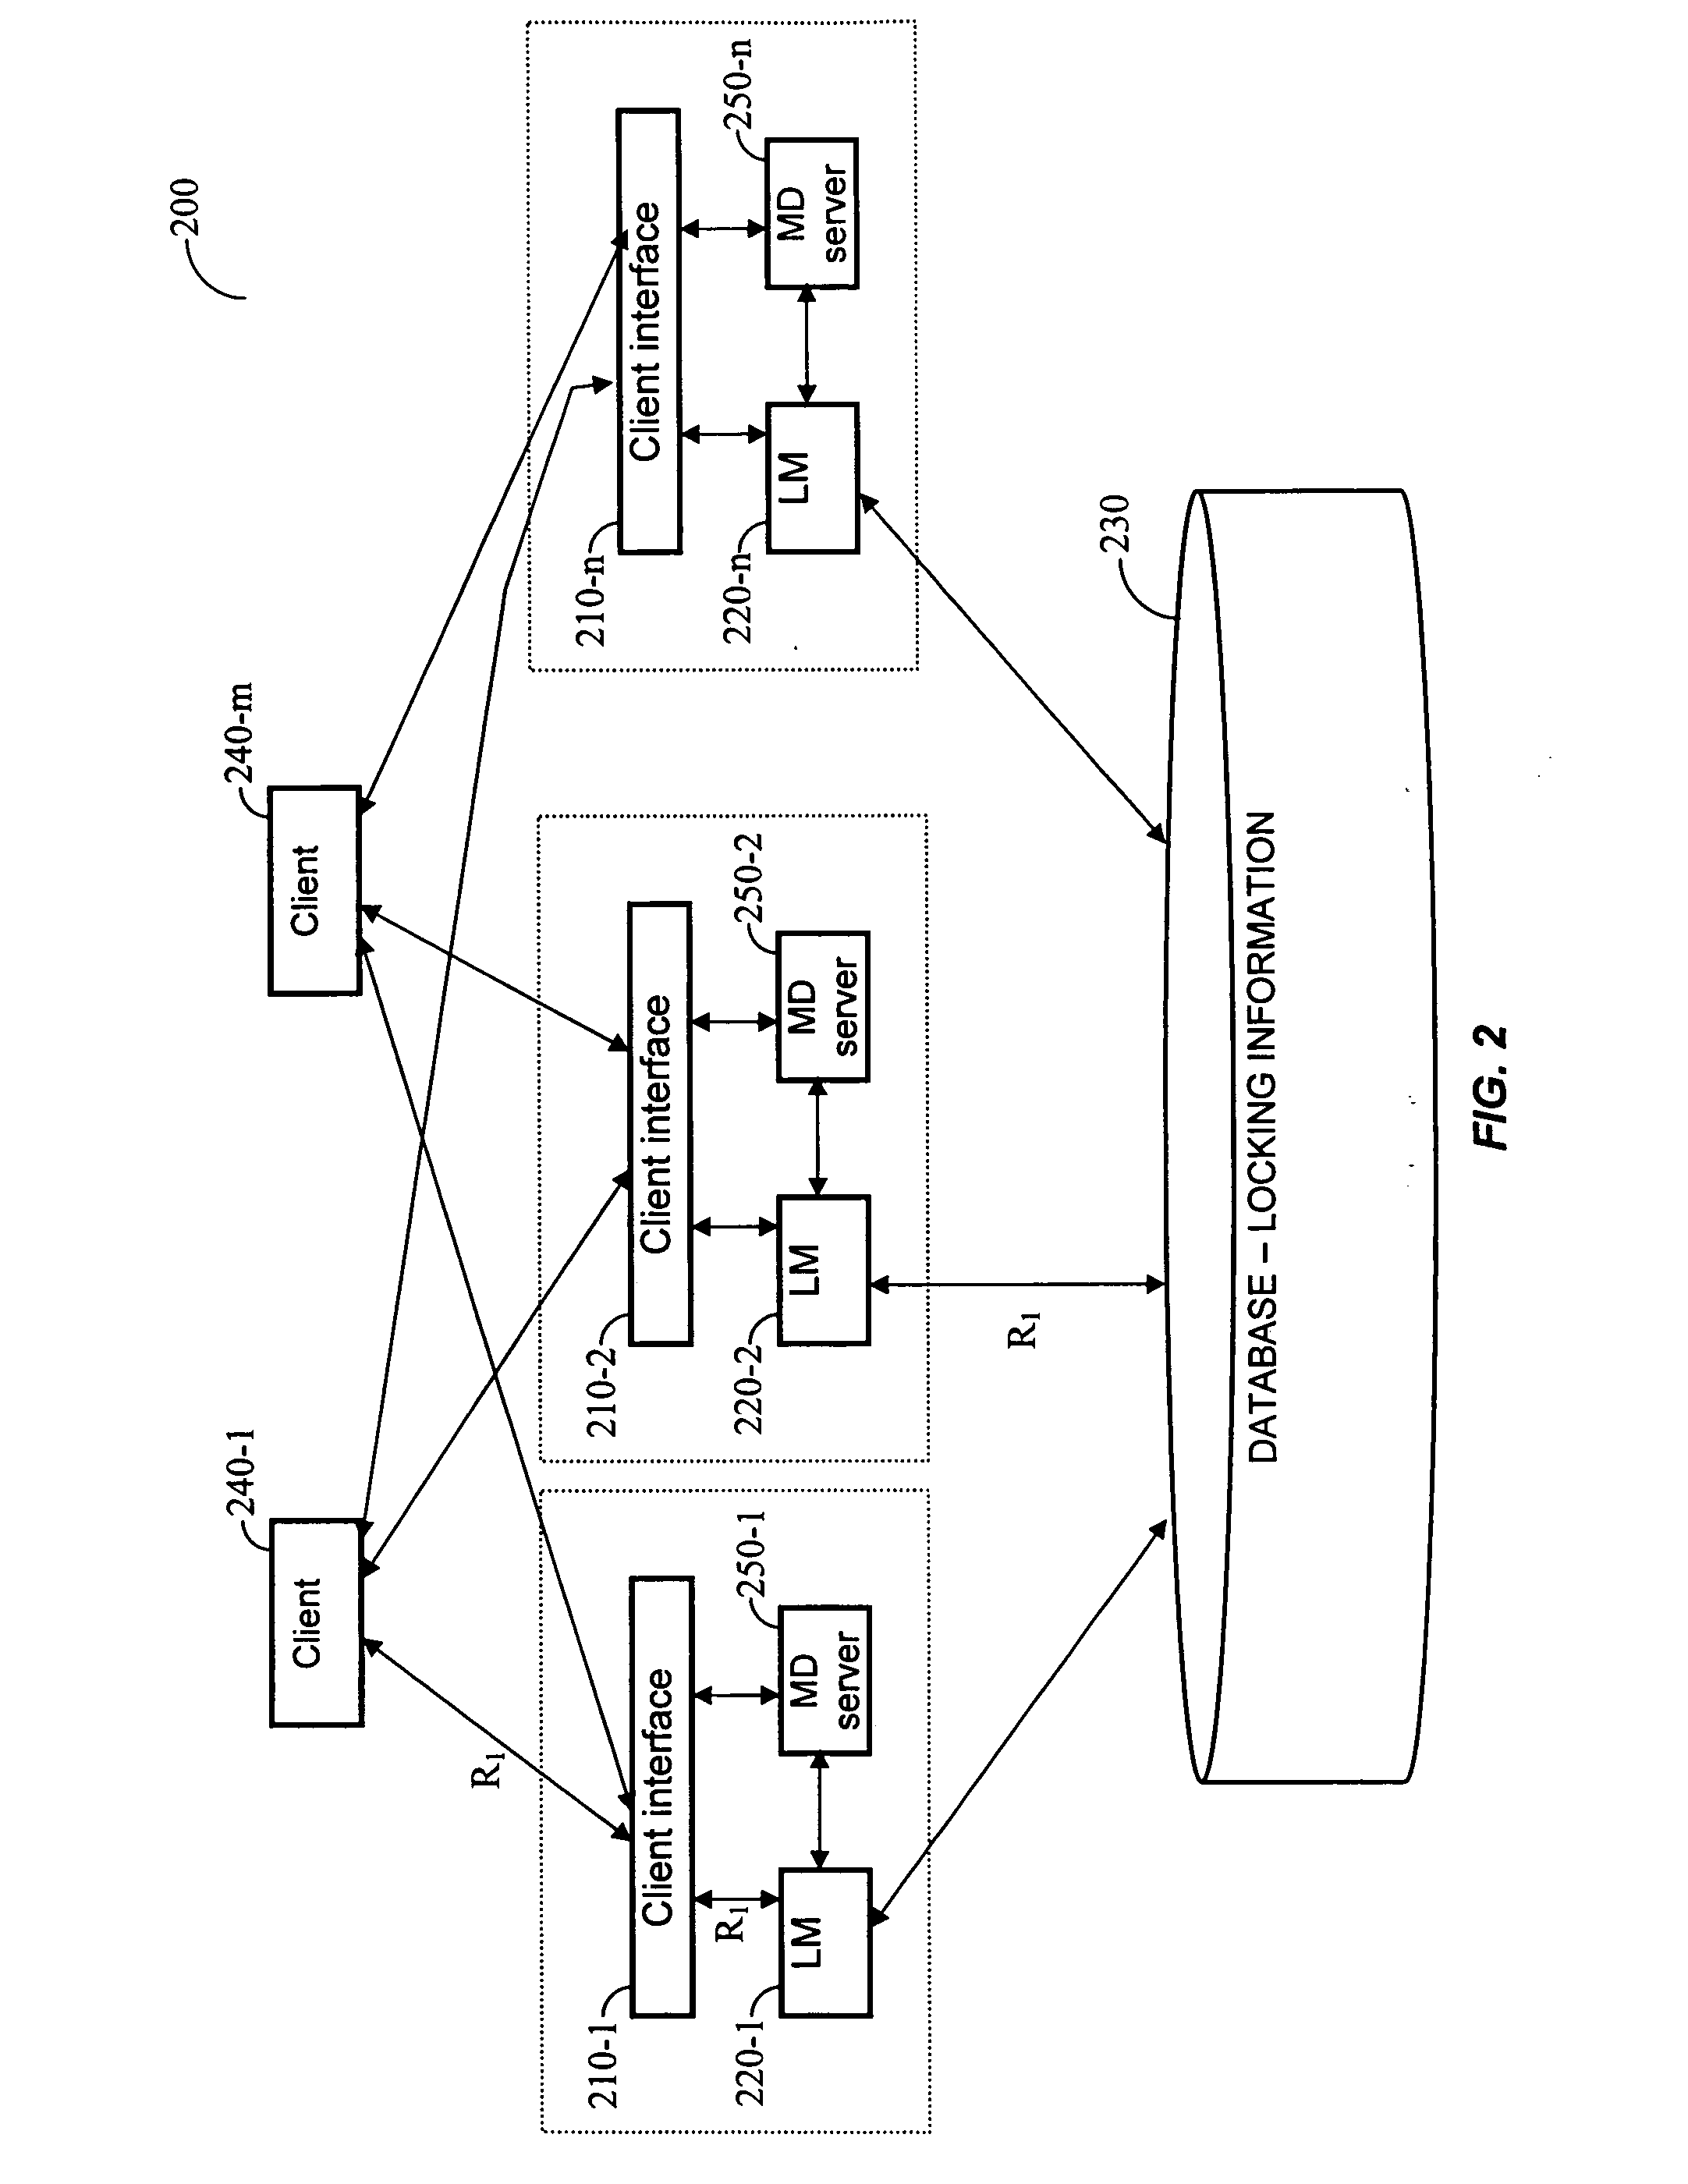 Method for managing lock resources in a distributed storage system